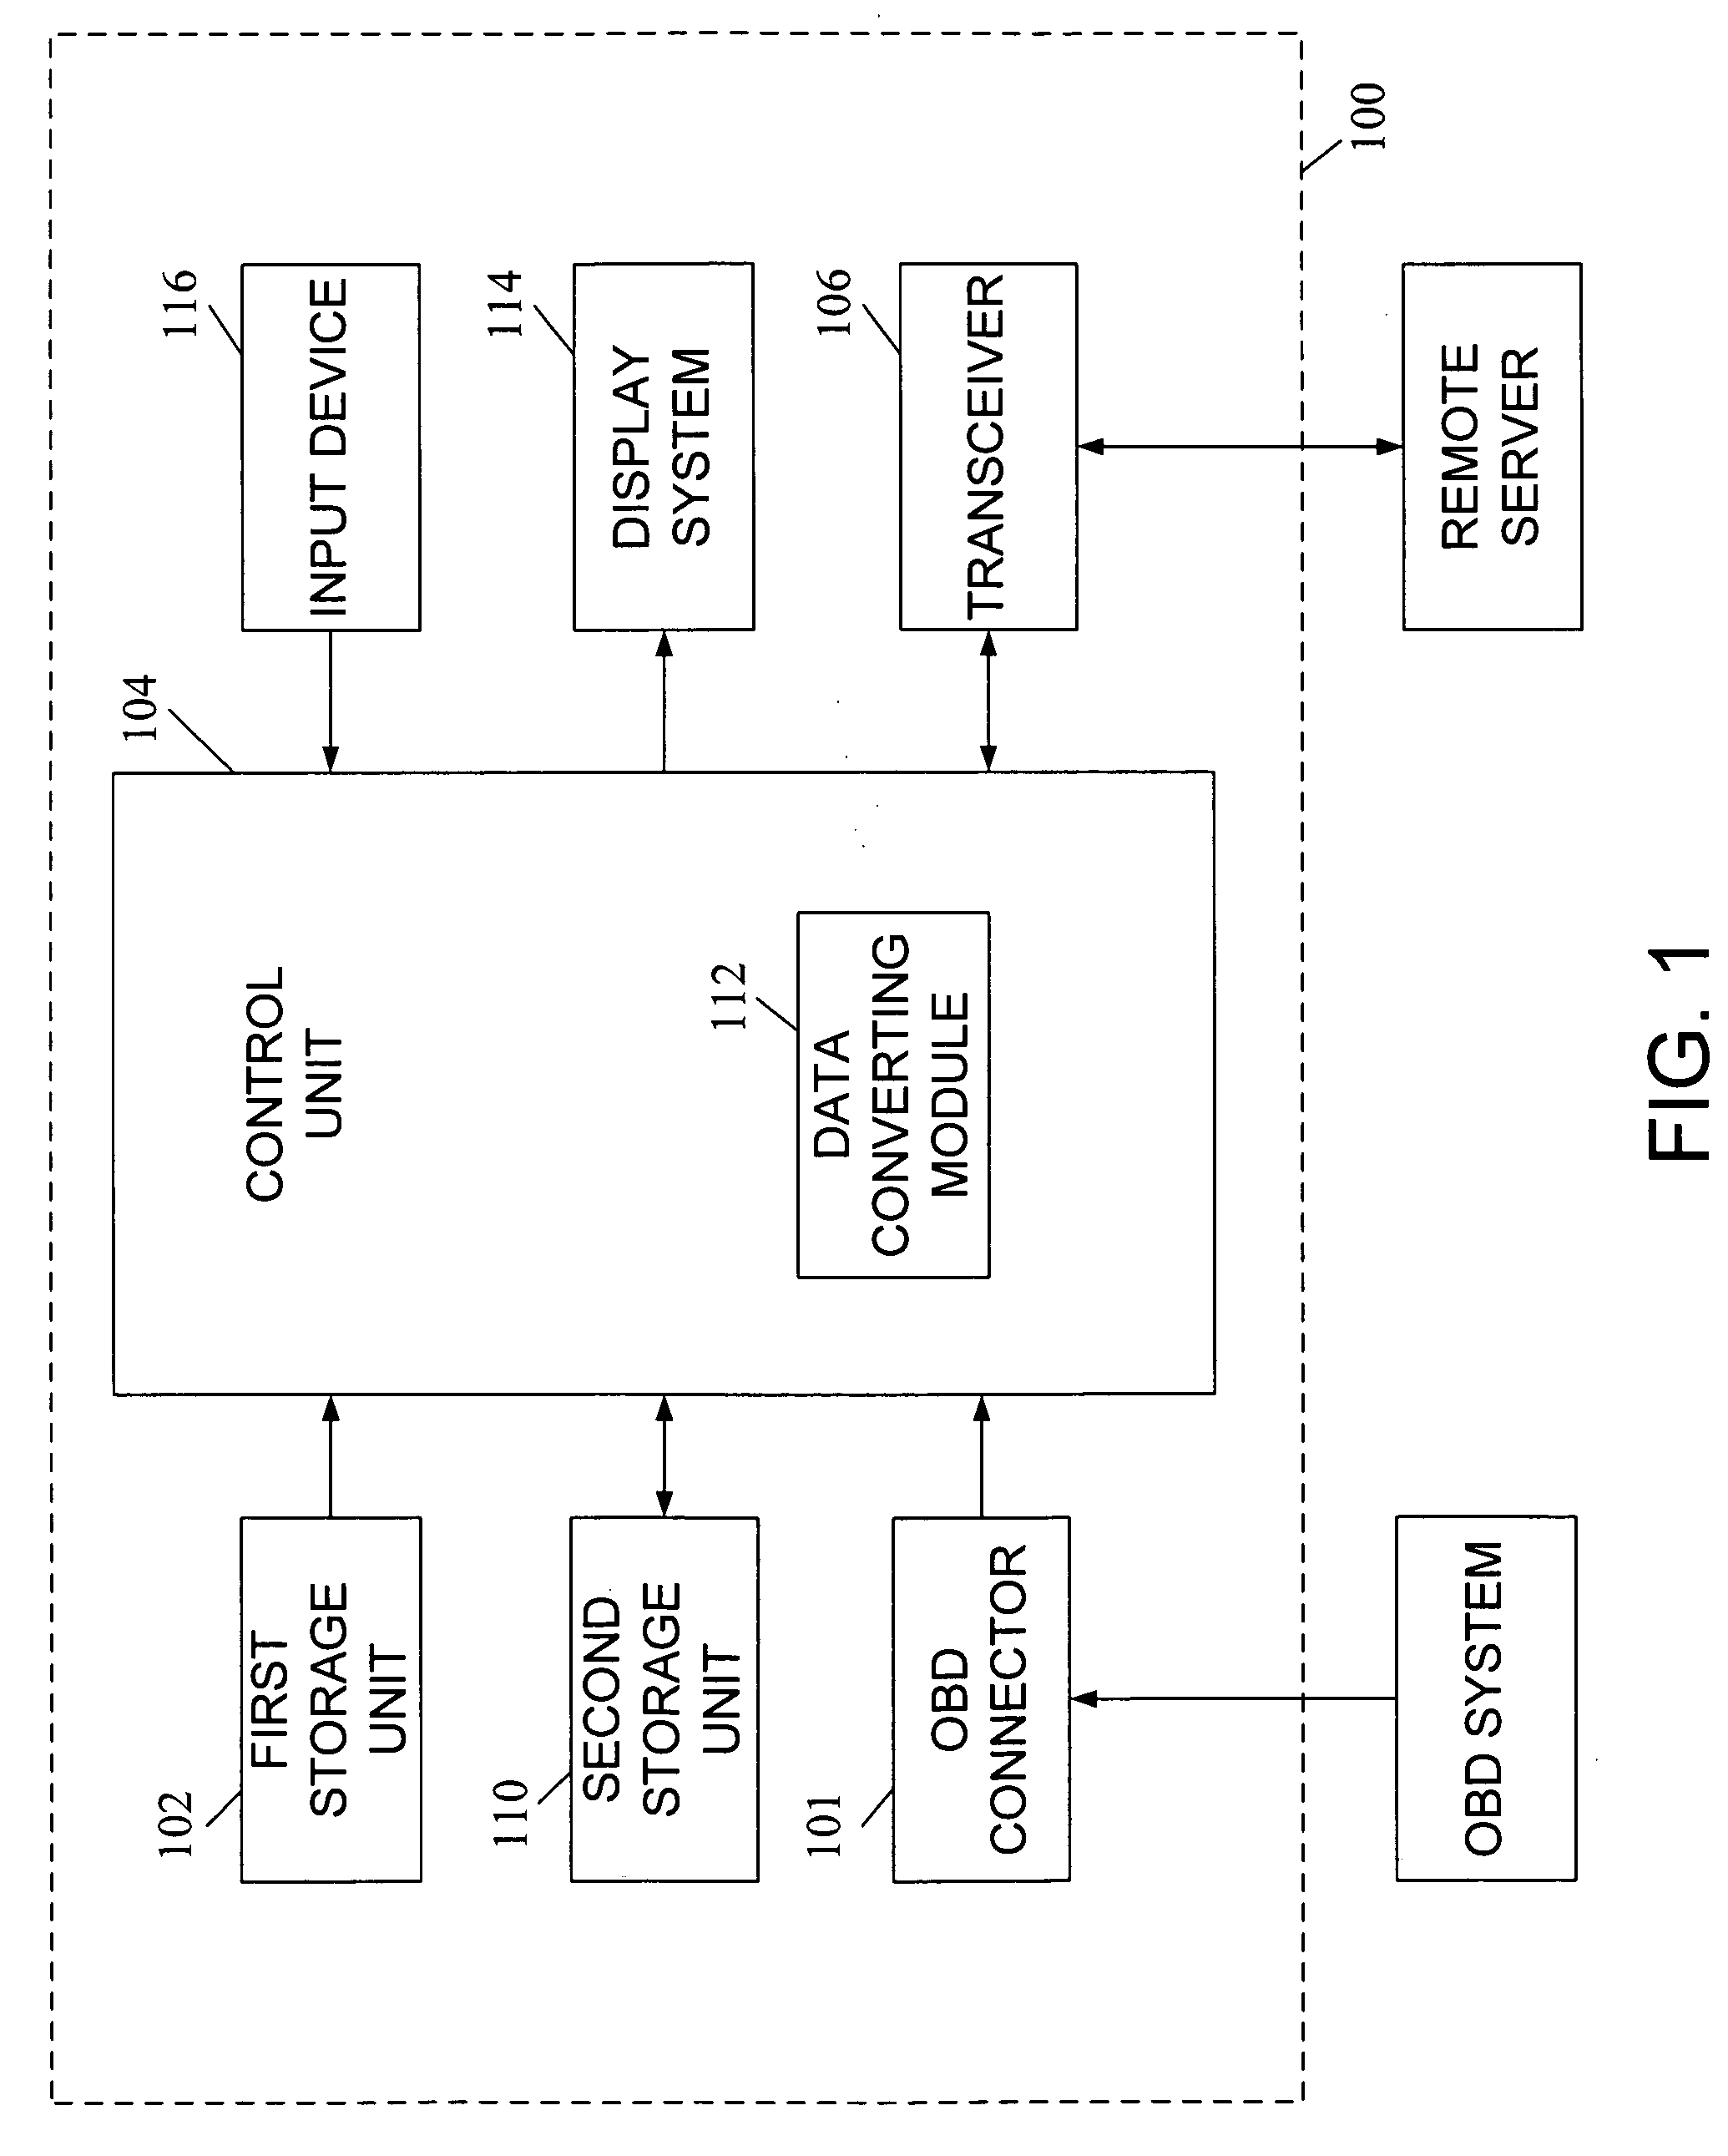 Method and system for processing and transmitting automotive emission data